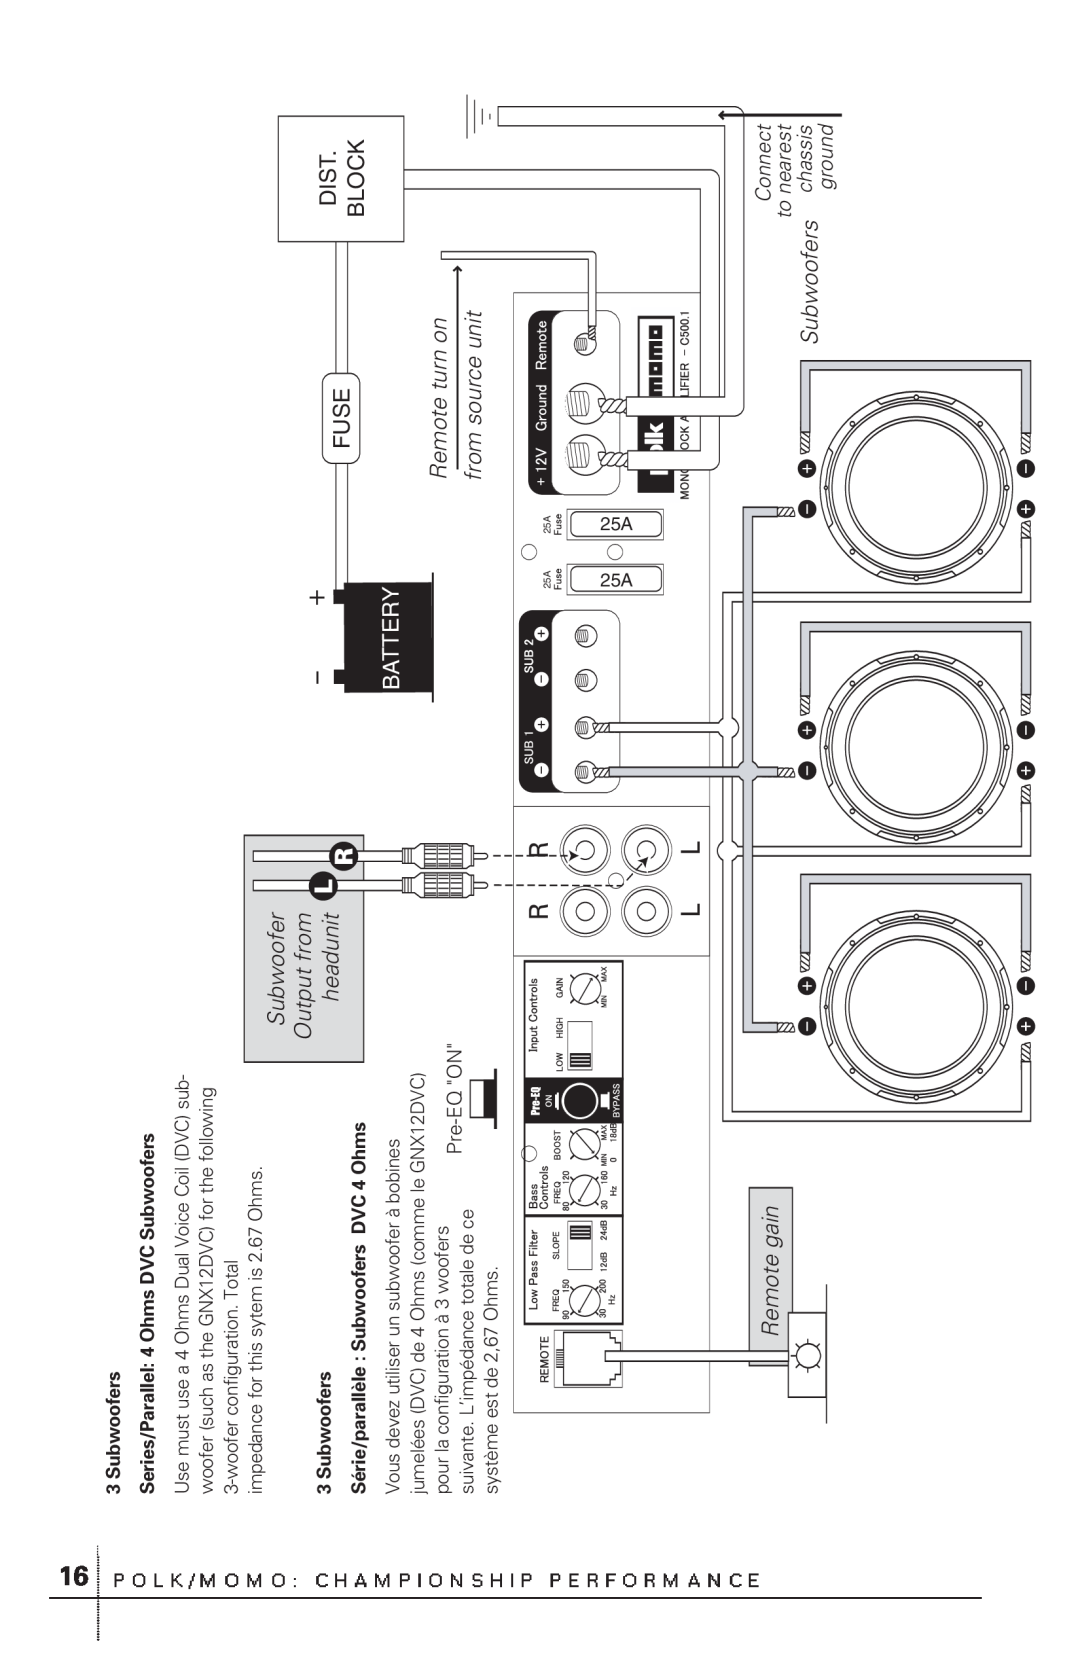 Polk Audio C500.1 Connect, chassis, ground, Series/Parallel 4 Ohms DVC Subwoofers, to nearest, Fuse, Battery 